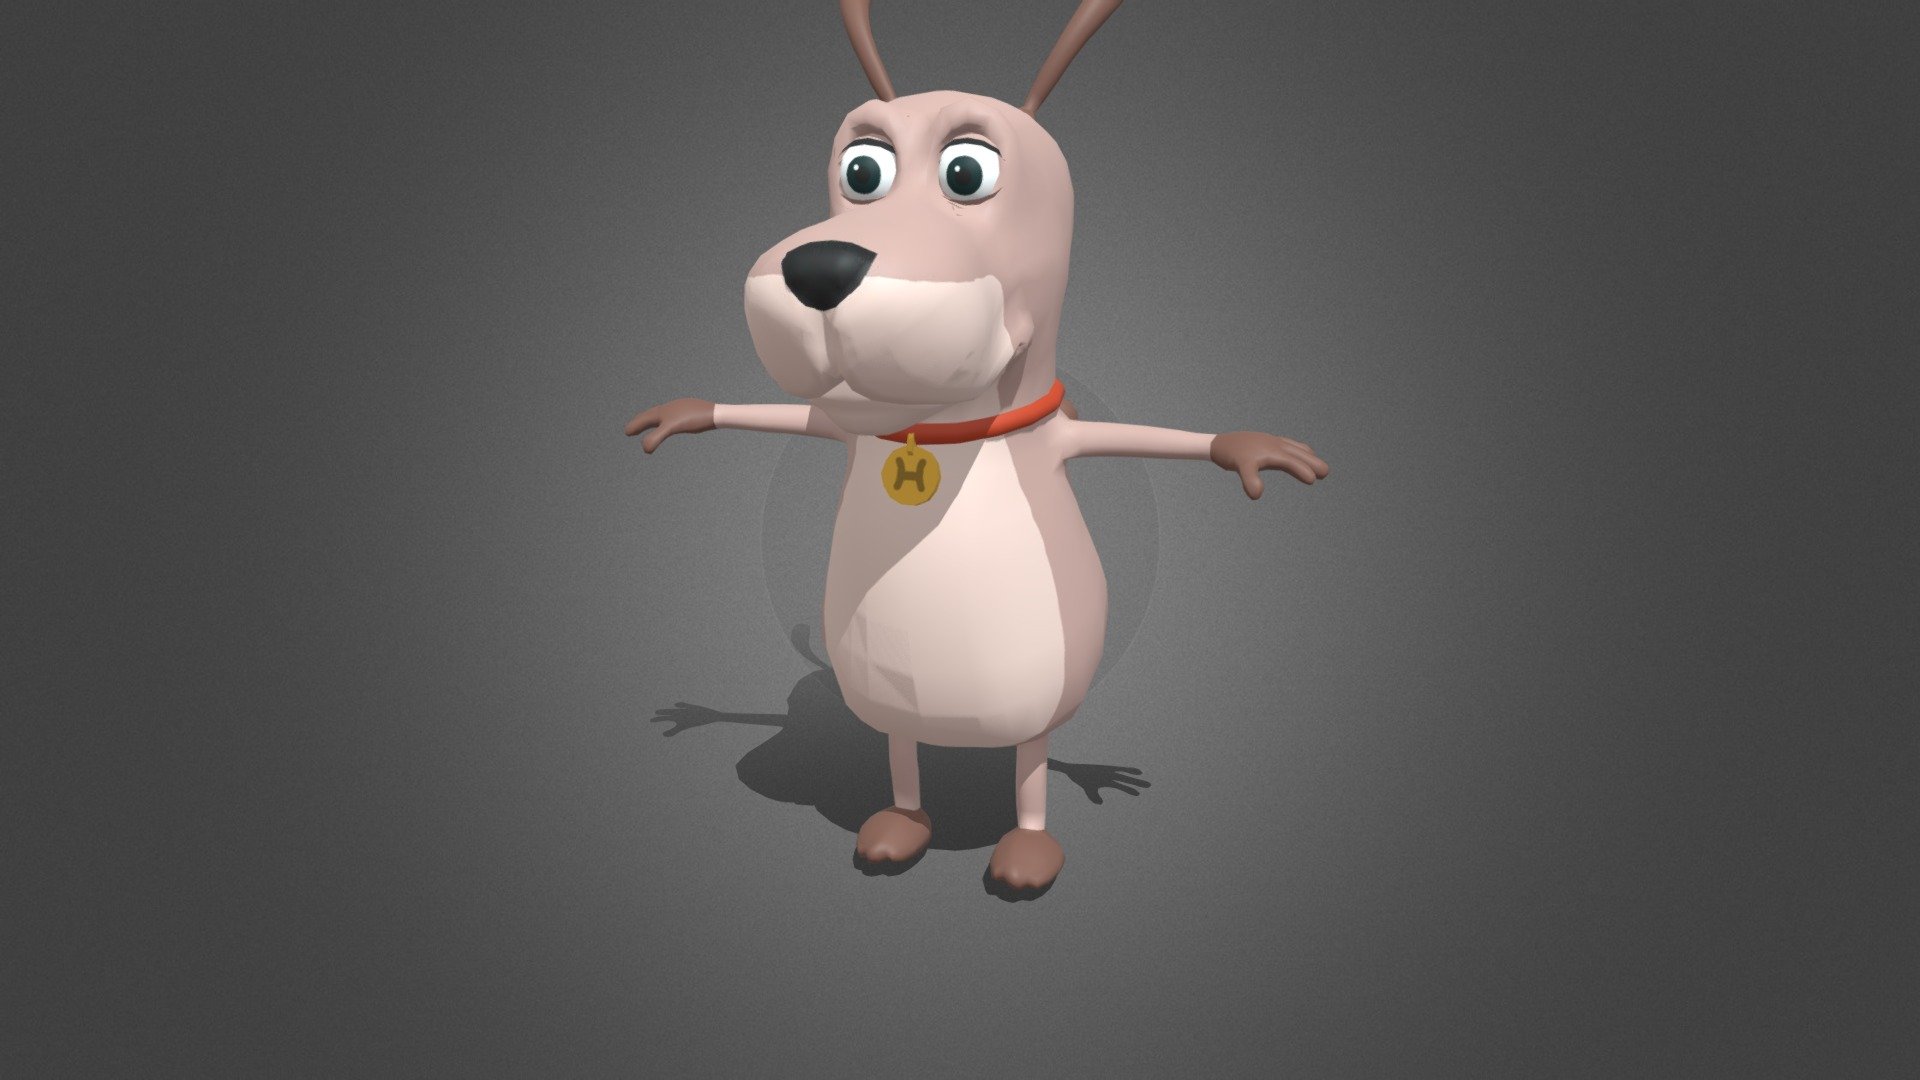 Cartoon Dog 3D Model:
- Model and Rigs made in Maya
- Lowpoly, 3517 vertices; 6804 tris
- 5 variations of  textures
- Nice topology, optimized, game ready
- All rigged, ready for animation - Cartoon Dog with Rigs and Poses - Buy Royalty Free 3D model by Dzung Dinh (@hugechimera) 3d model